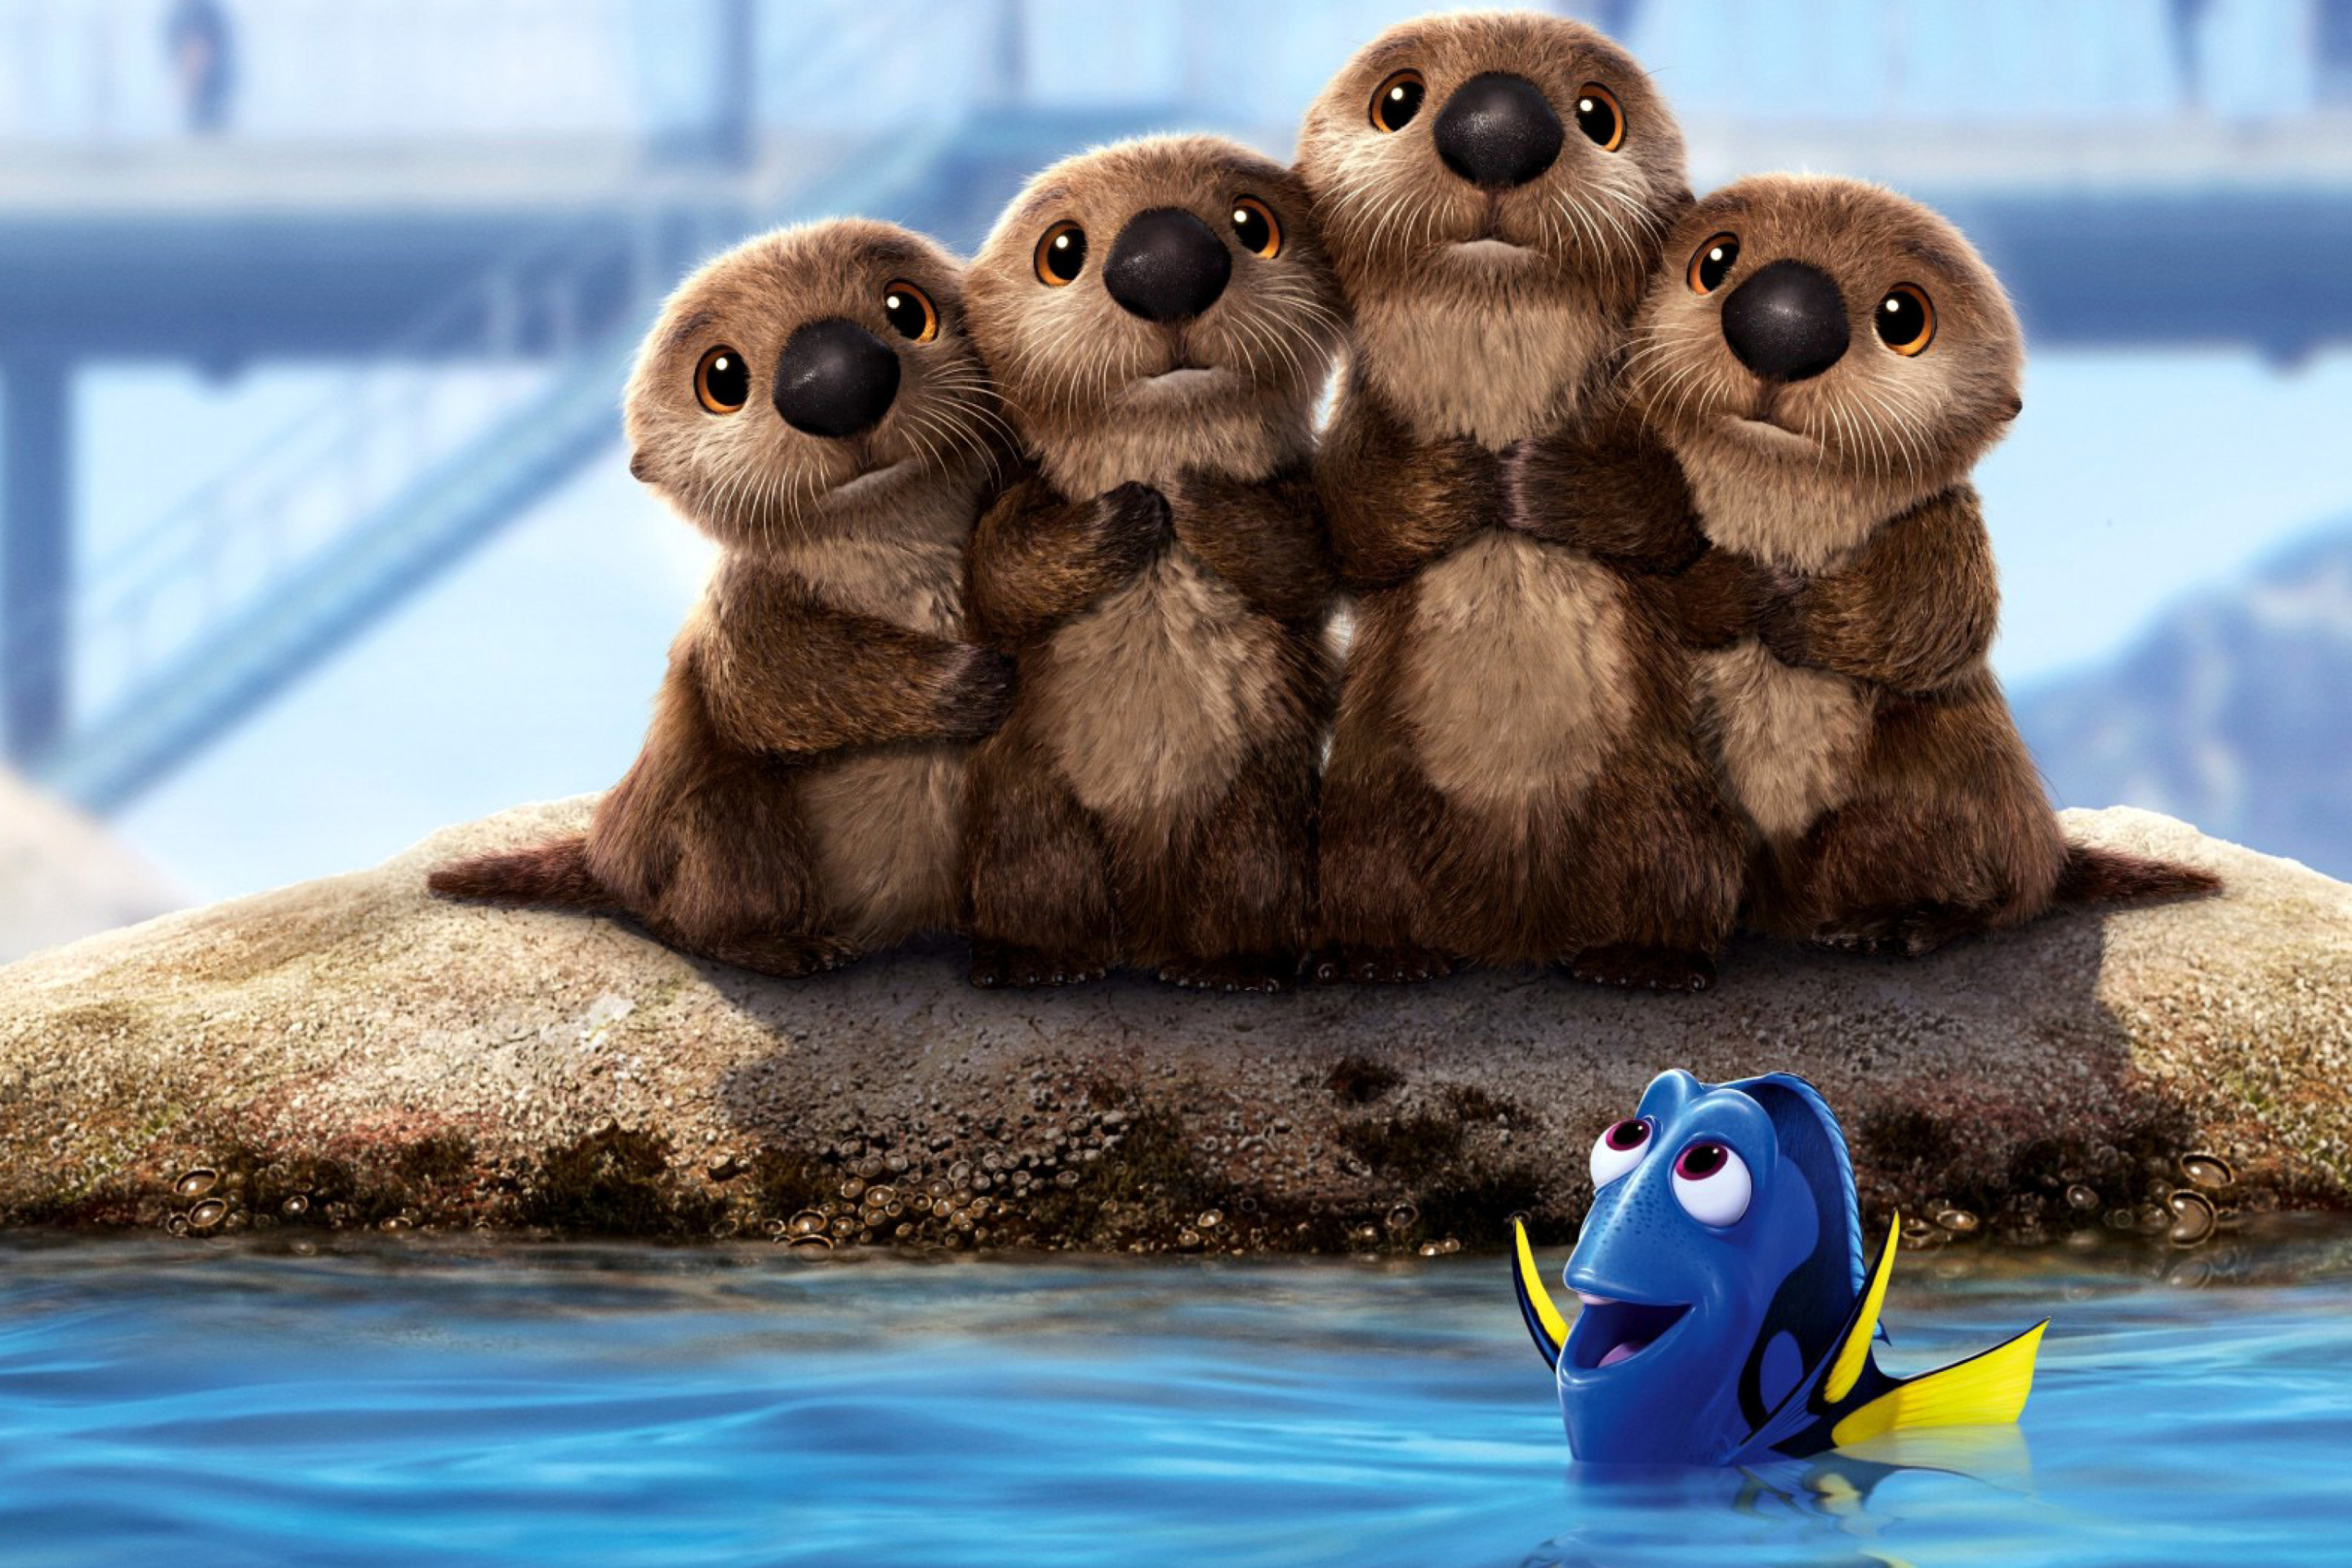 Finding Dory 3D Film with Beavers wallpaper 2880x1920